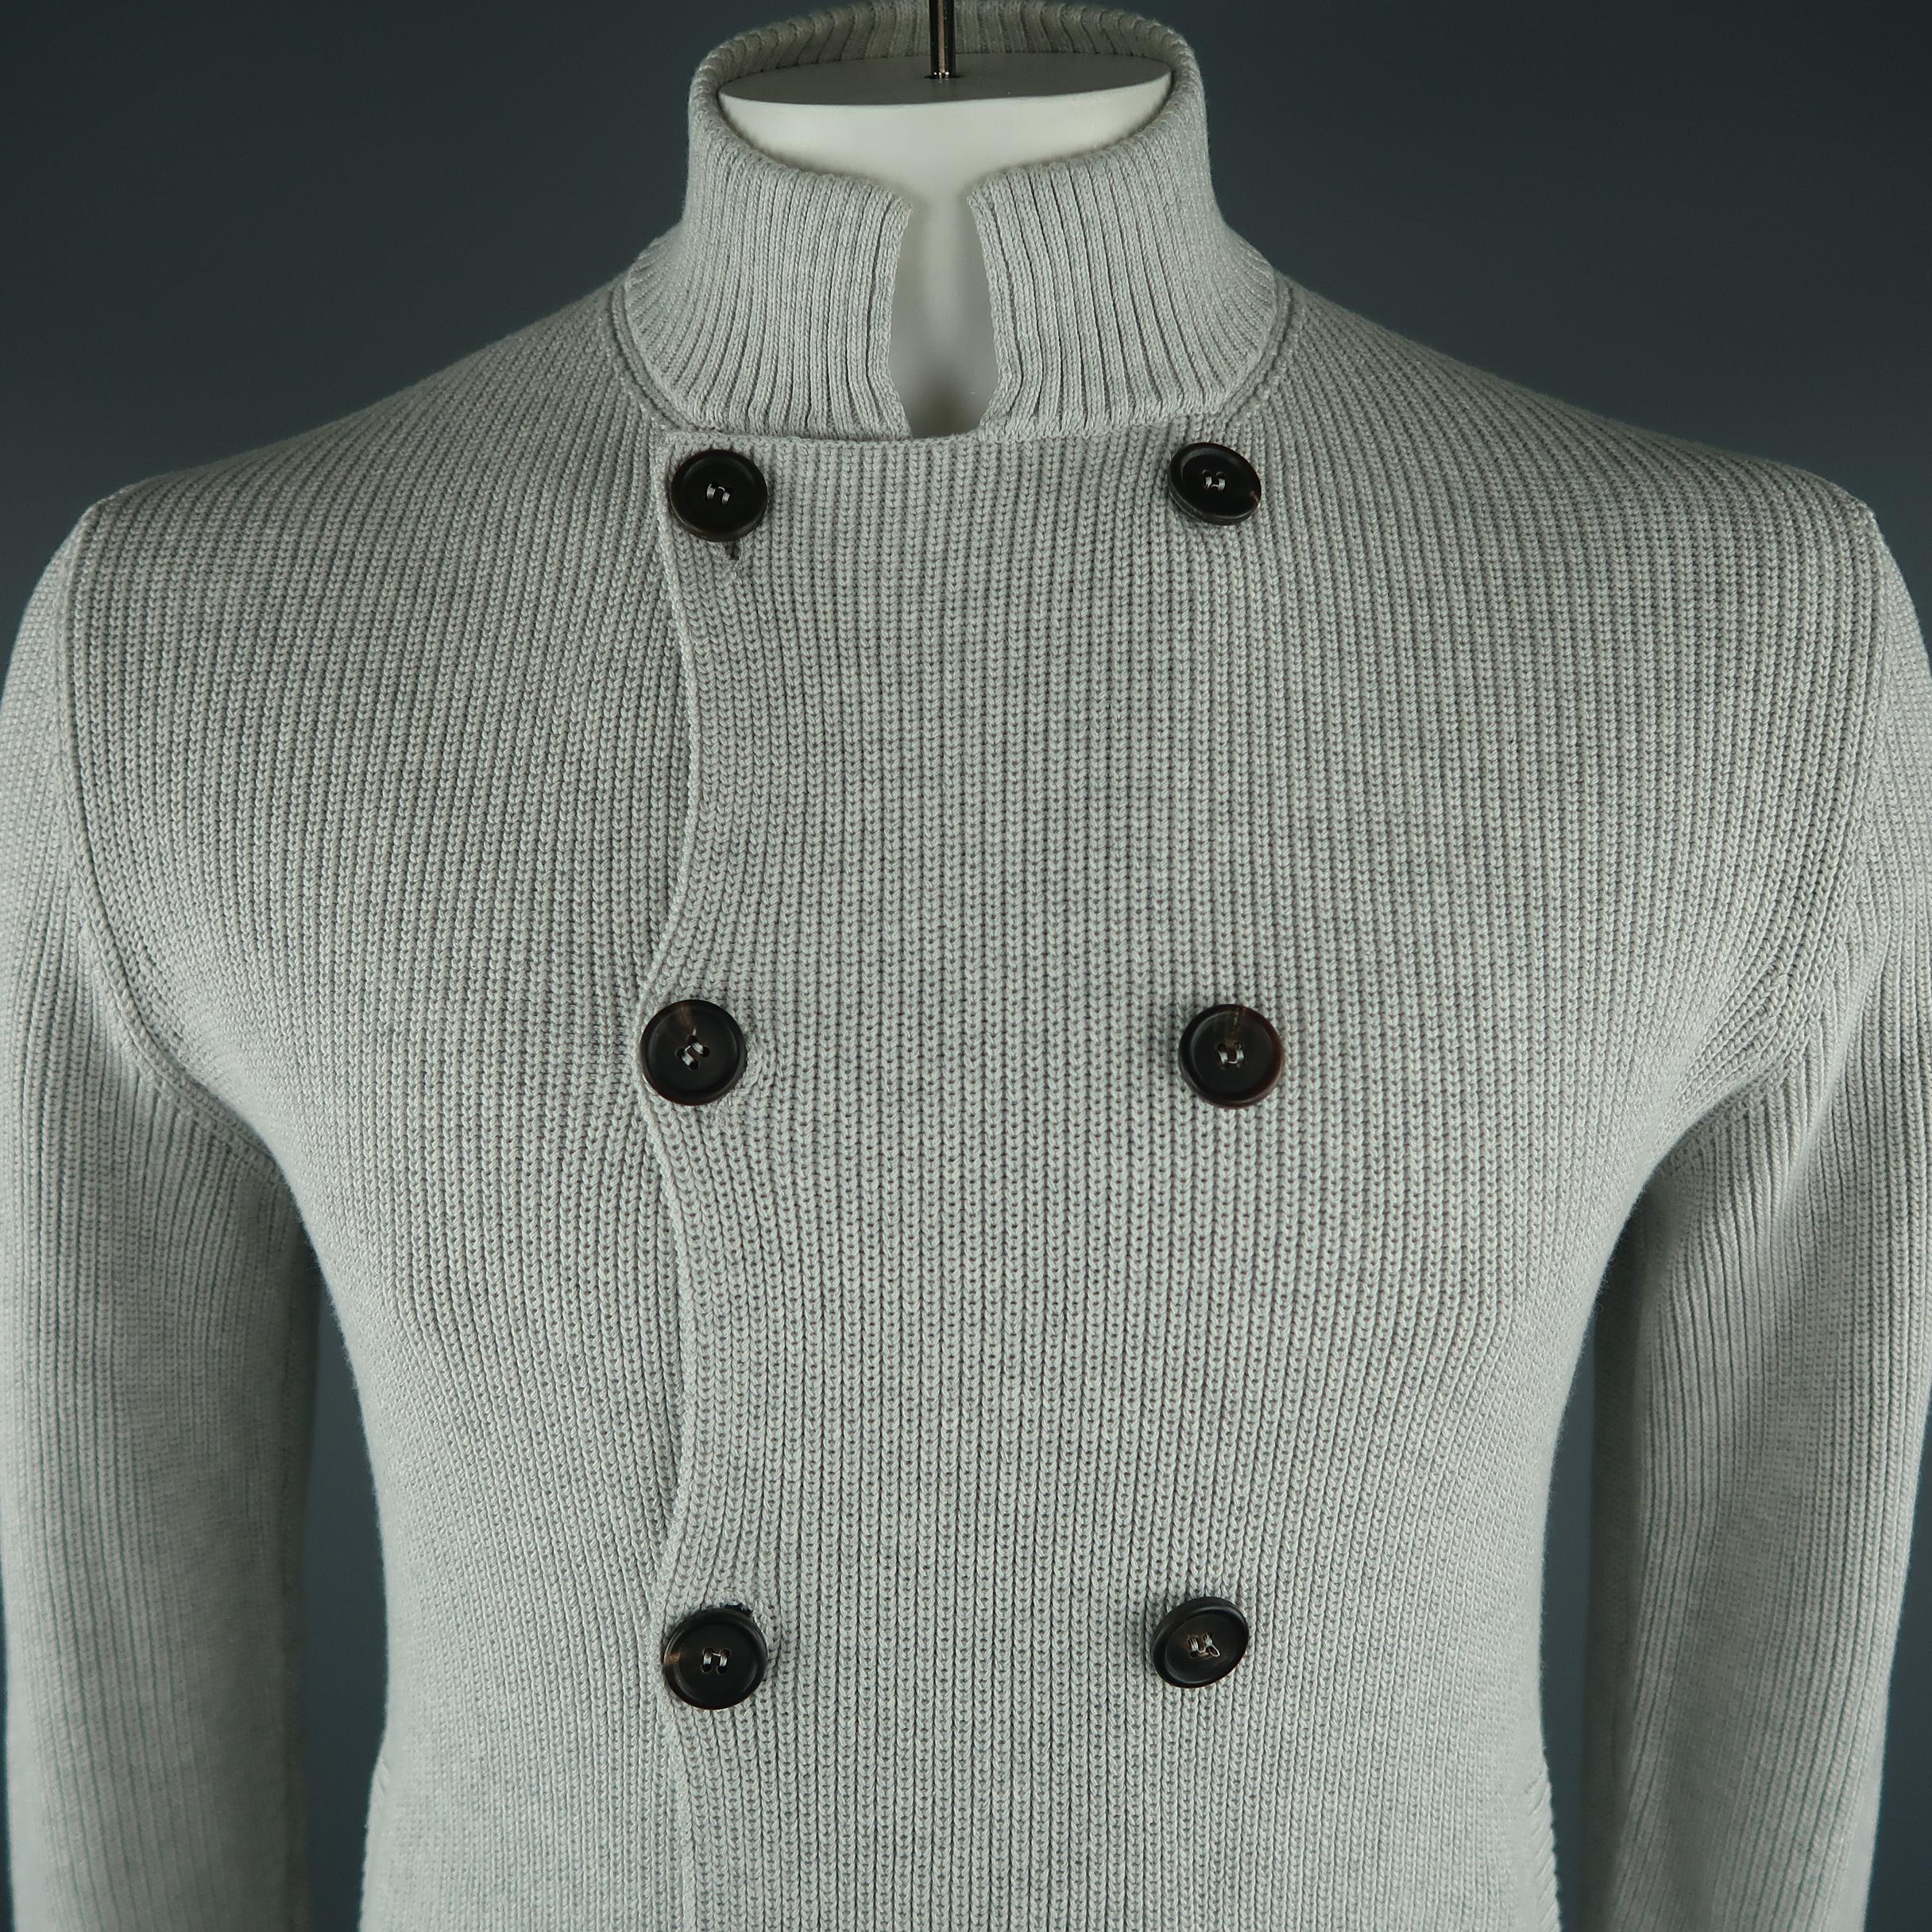 BRUNELLO CUCINELLI cardigan come in light grey knitted cotton, with front slit pockets, double breasted and stand collar. Made in Italy.
 
Excellent Pre-Owned Condition.
Marked: 52 IT
 
Measurements:
 
Shoulder: 16 in.
Chest: 40 in.
Sleeve: 28